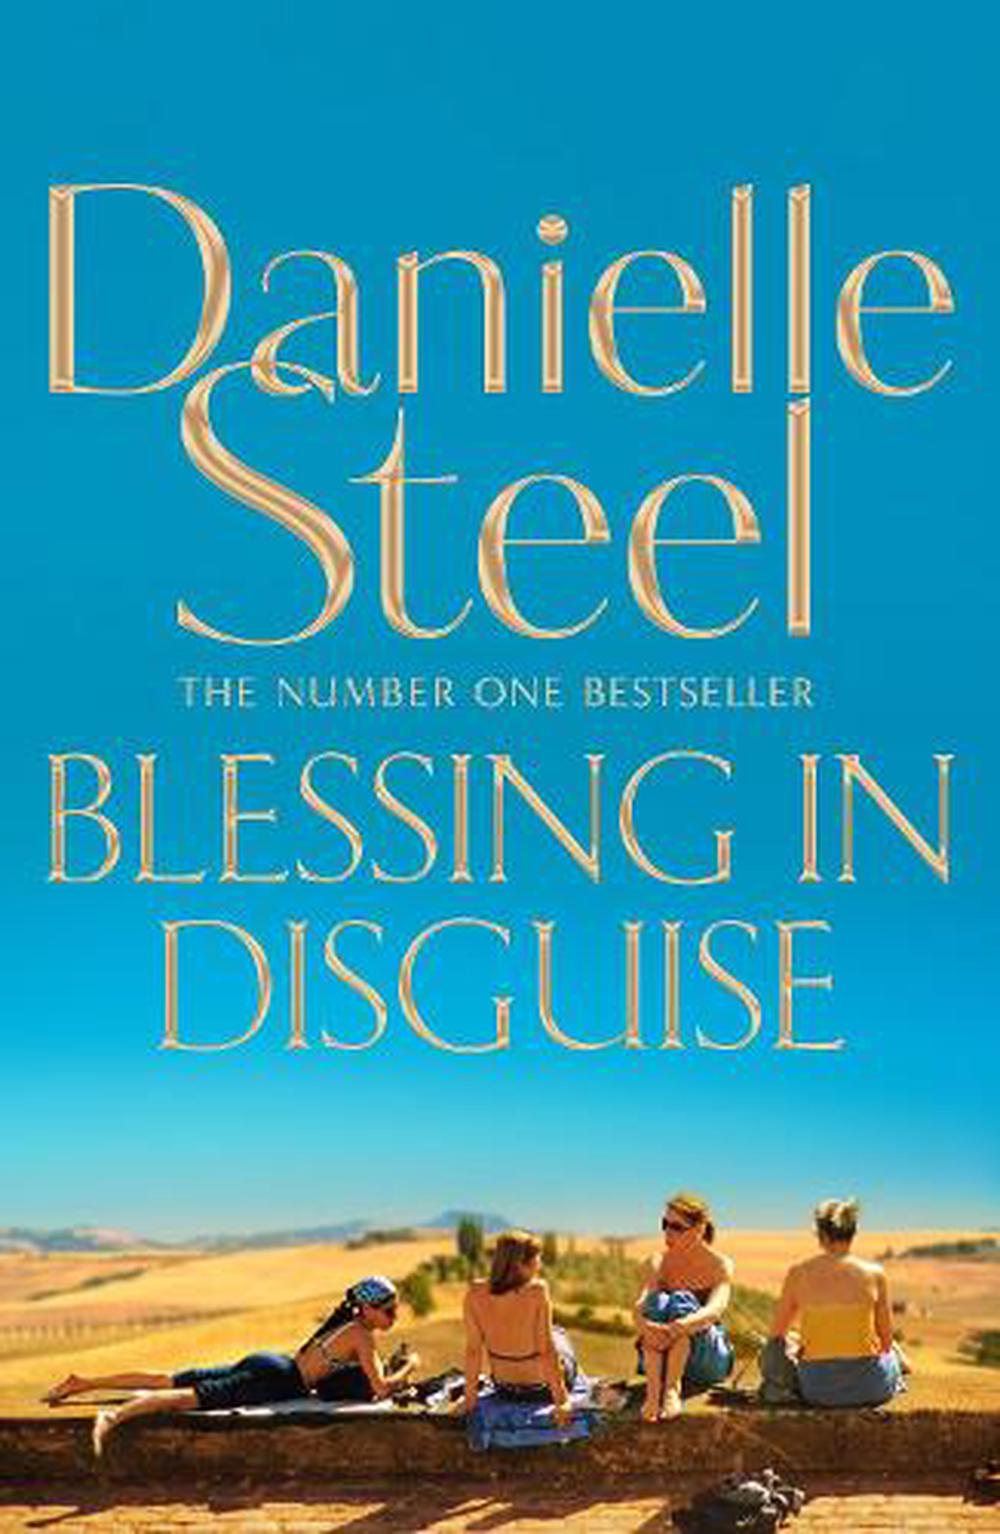 Blessing in Disguise by Danielle Steel Hardcover Book Free Shipping